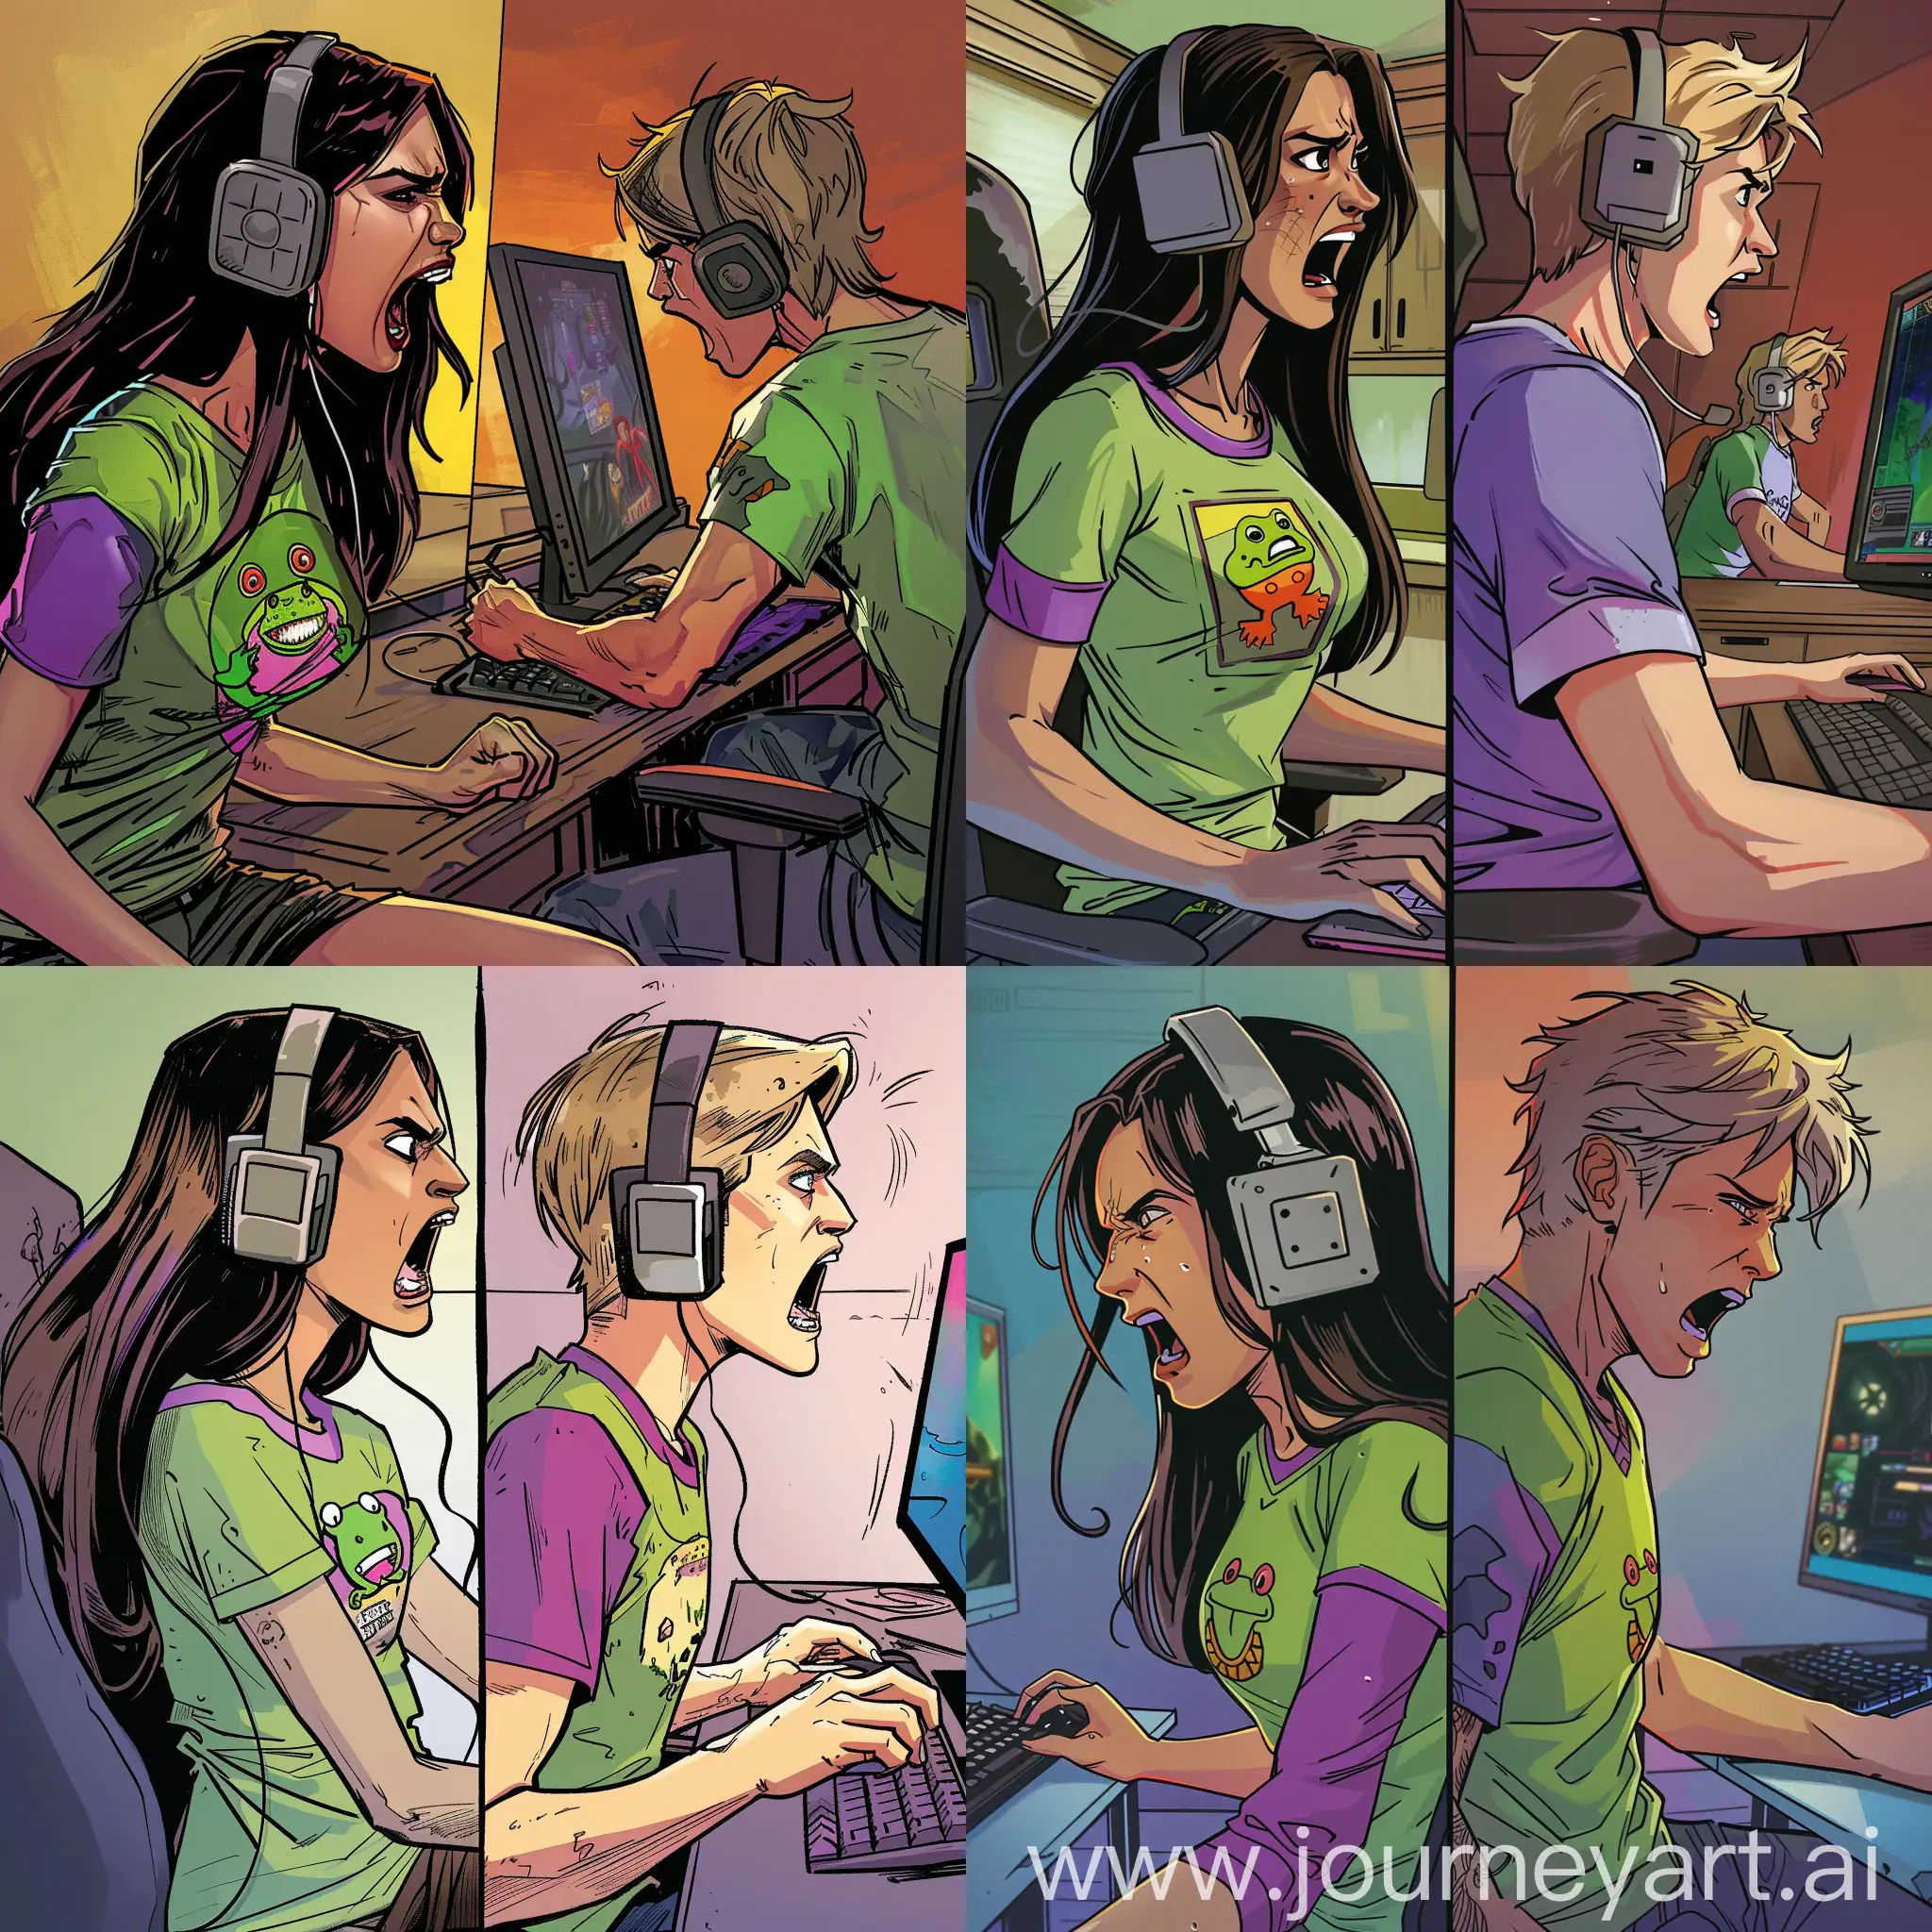 In the style of a newspaper cartoon comic, colorful. A young 25 year old woman, with long waste length dark brown hair and grey square headphones, wearing a tight green t-shirt, with purple sleeves and shoulders, and a cartoon frog in the middle, sits in front of a computer monitor and is screaming angry at the game. we see this from exactly side-on, split down the middle, on the right side of the image is another person, a man 25 years old with blonde hair (it is xqc), is also sitting at his computer monitor screaming at it. It looks as if their desks are back to back, but it is 2 seperate rooms.